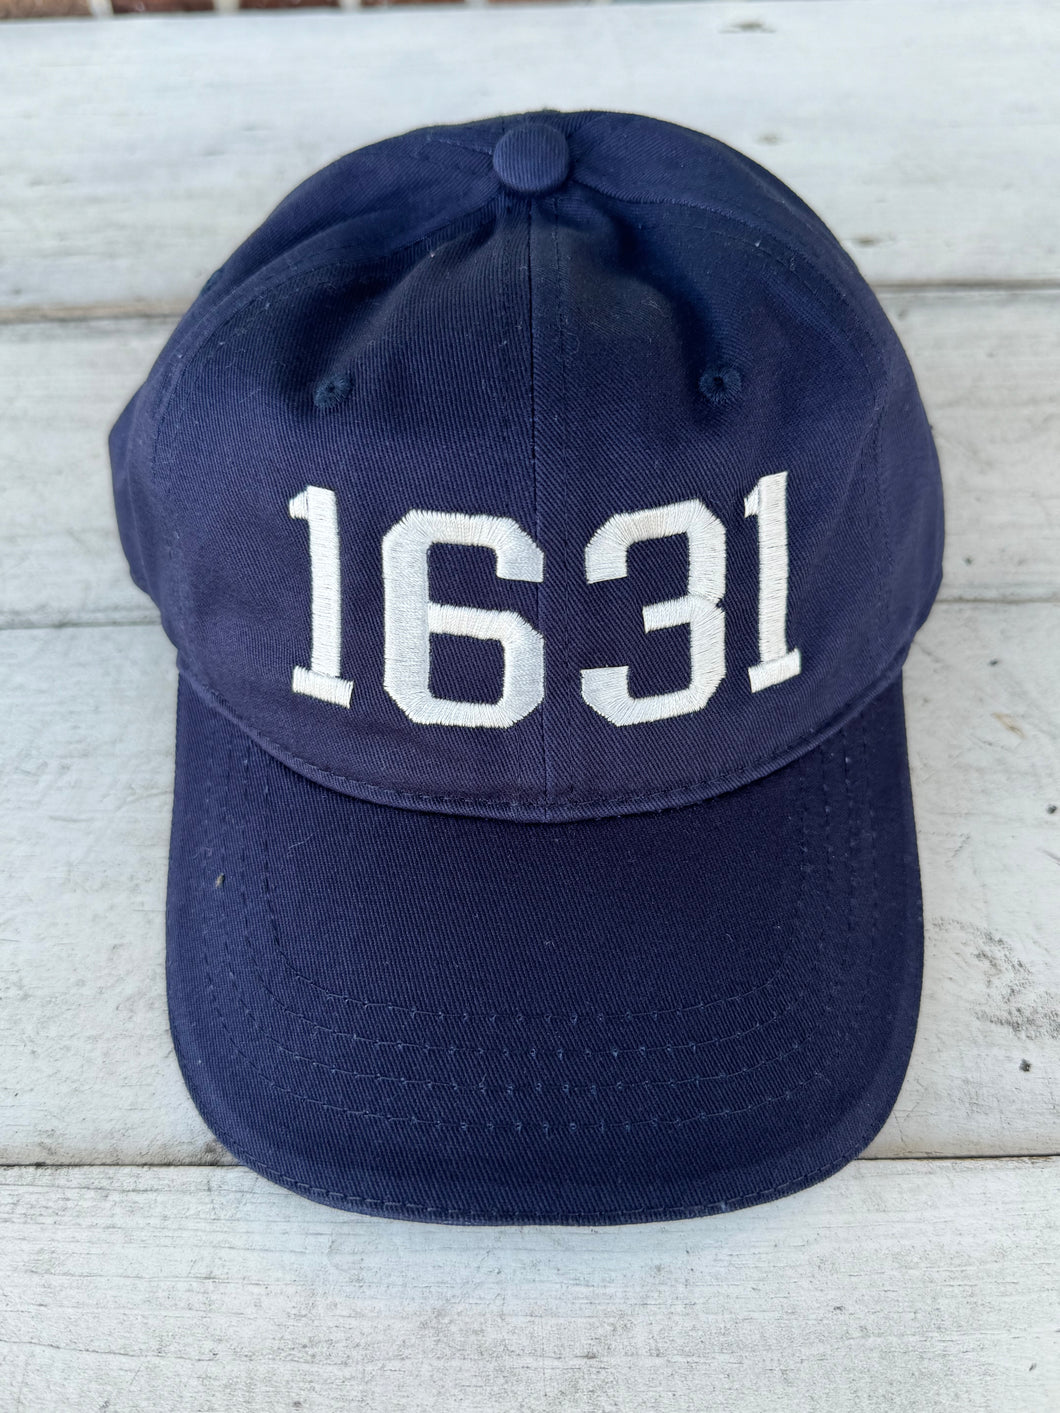 LEWES EMBROIDERED 1631 CAP